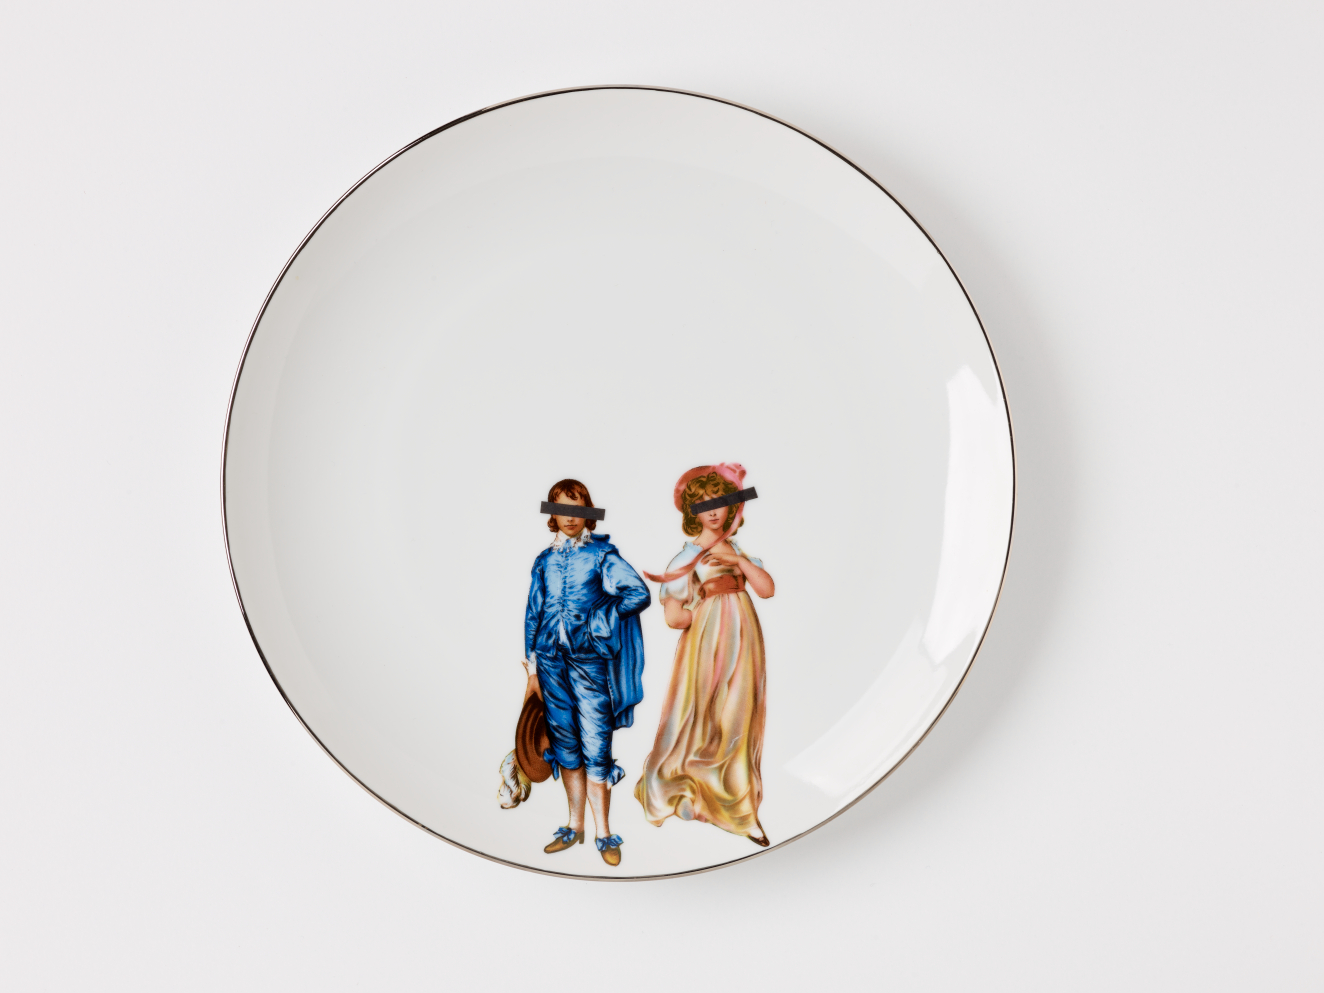 White circular plate with silver rim. Two figures at the lower center of the plate, one dressed in a blue outfit, the other in a pink dress, both with black, rectangular bars covering their eyes.